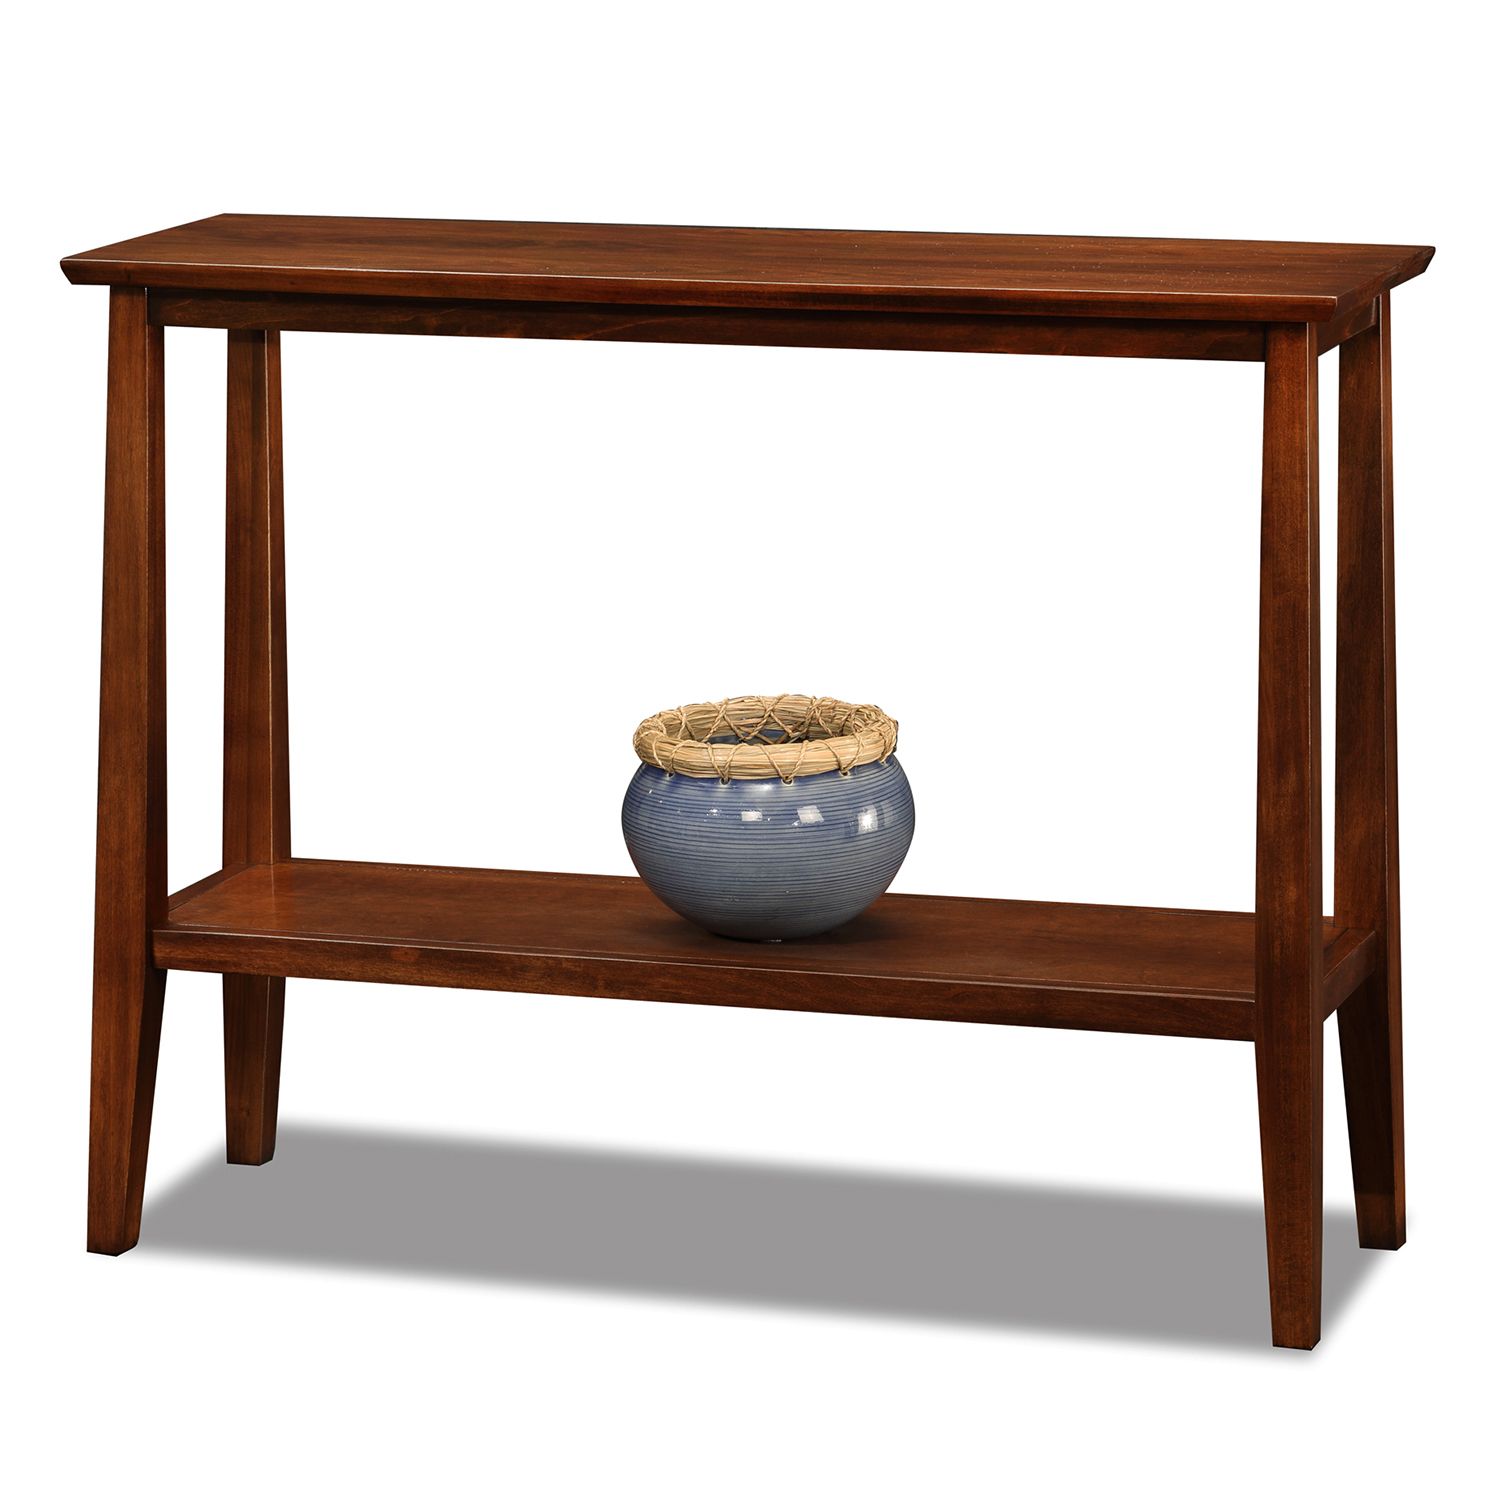 Image for Leick Furniture Sienna Finish Sofa Table at Kohl's.